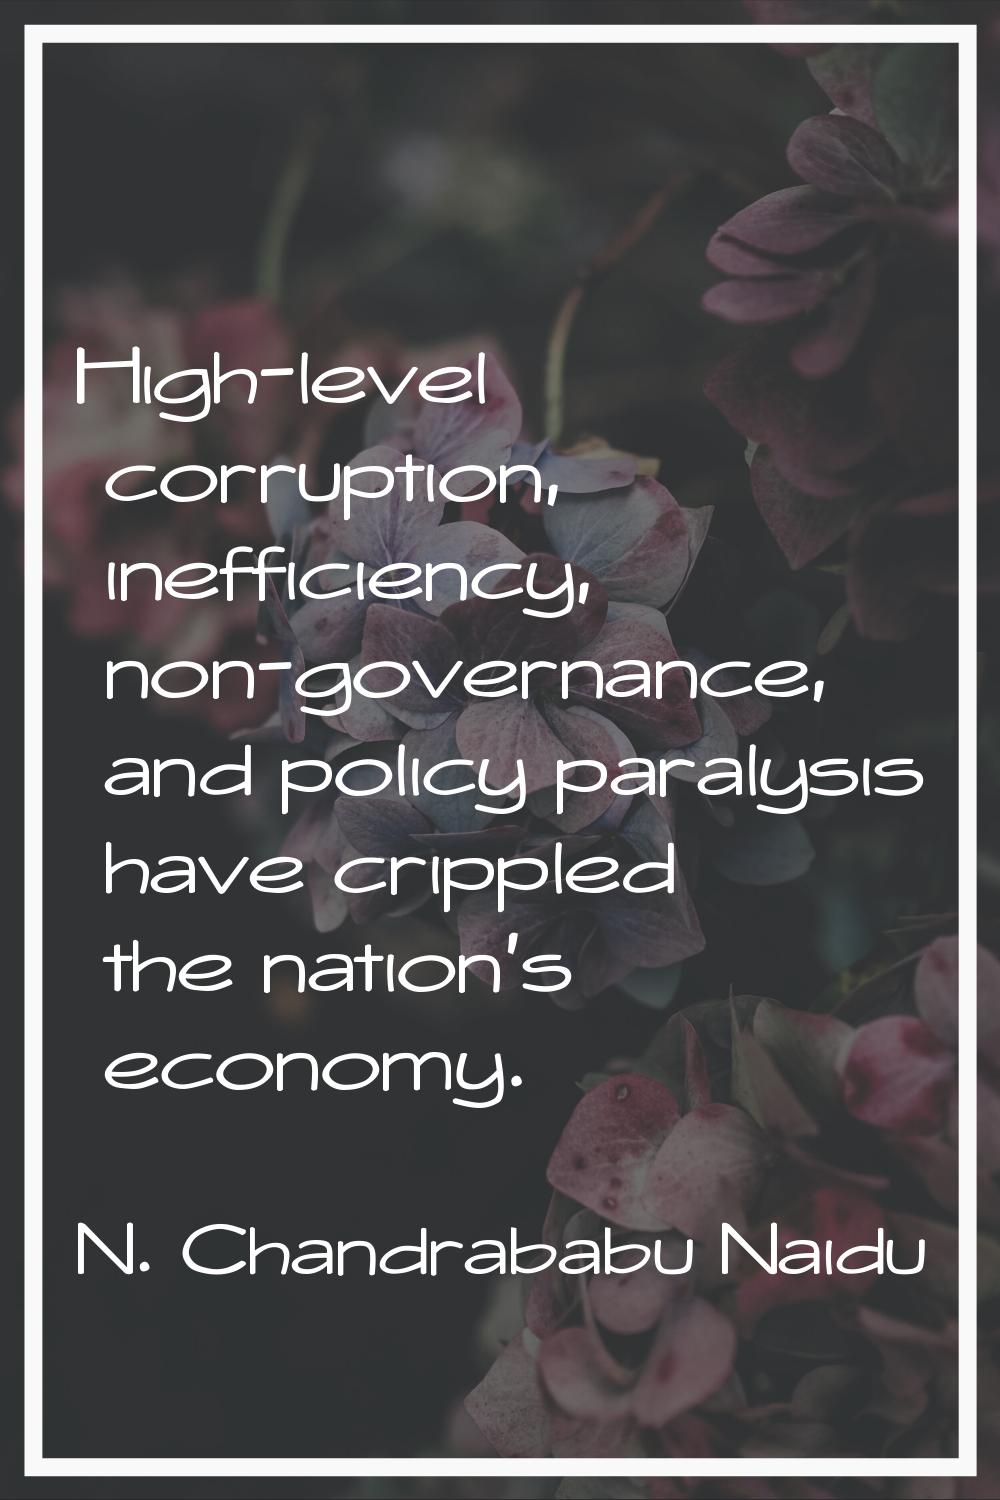 High-level corruption, inefficiency, non-governance, and policy paralysis have crippled the nation'